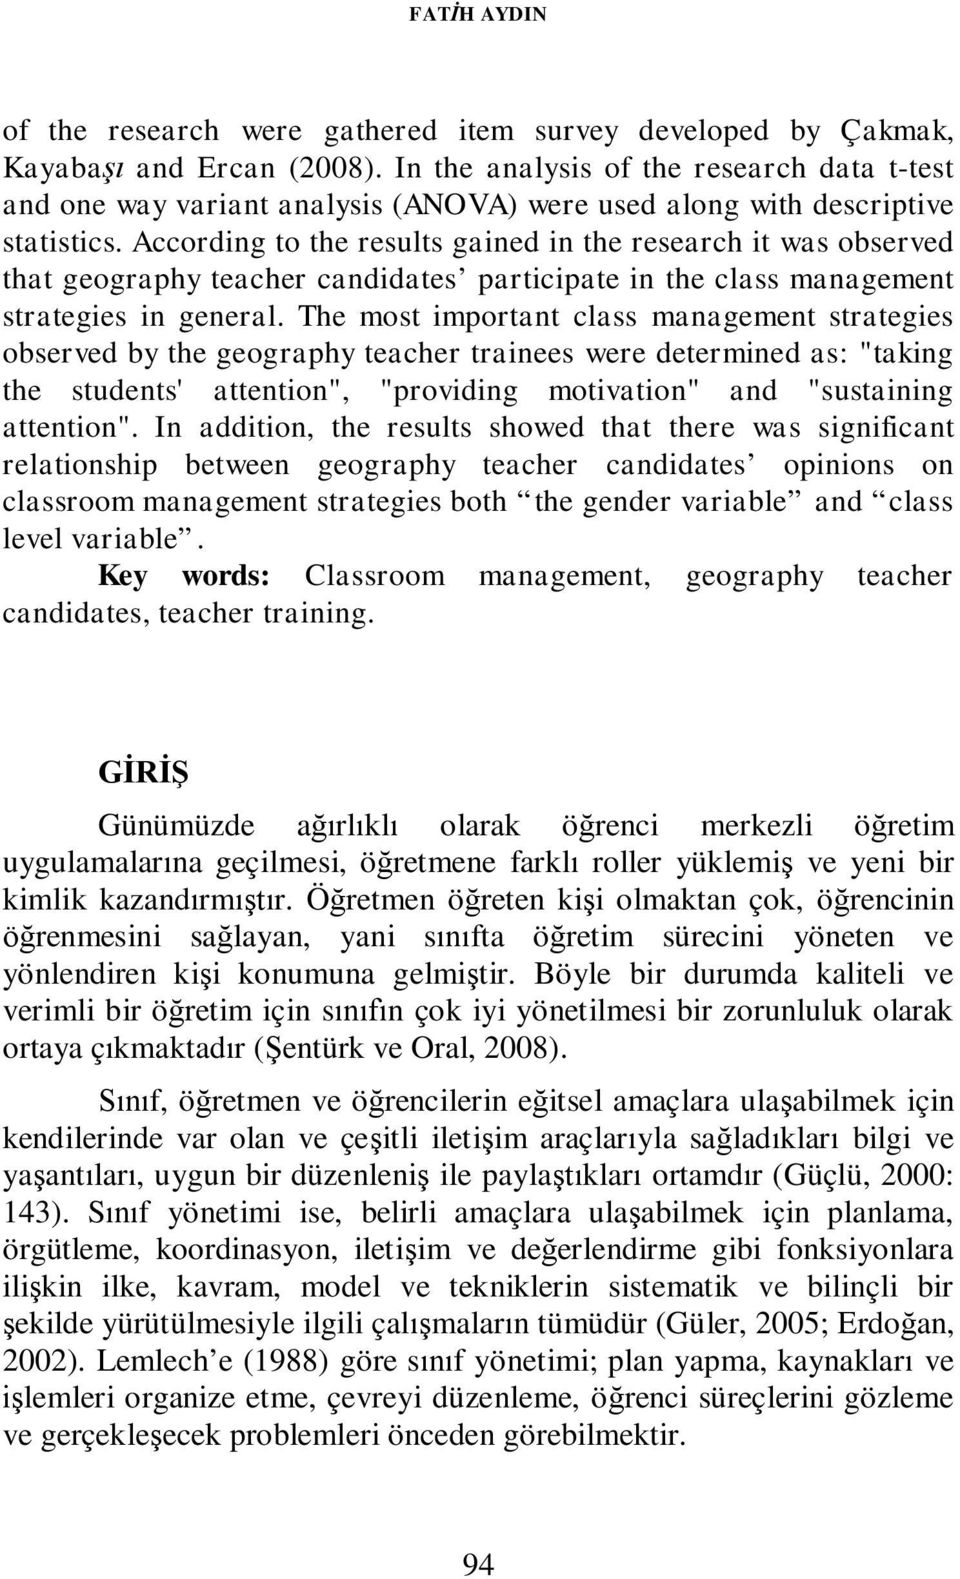 According to the results gained in the research it was observed that geography teacher candidates participate in the class management strategies in general.